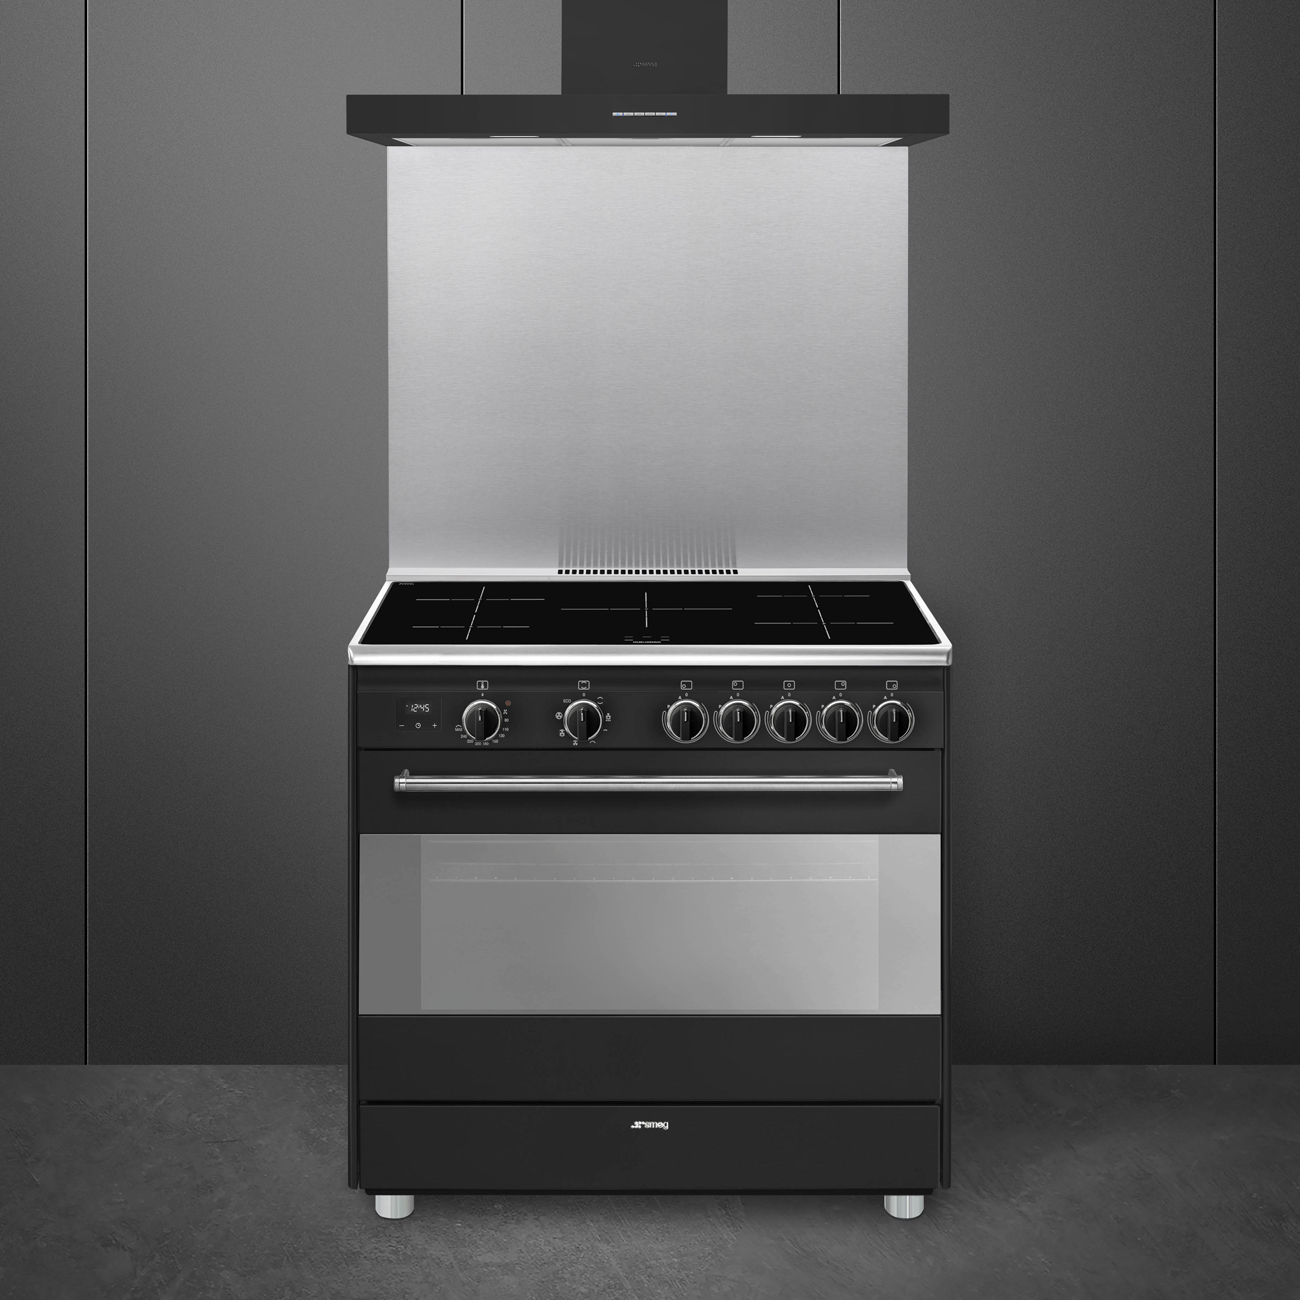 Smeg Anthracite Cooker with Induction Hob_2